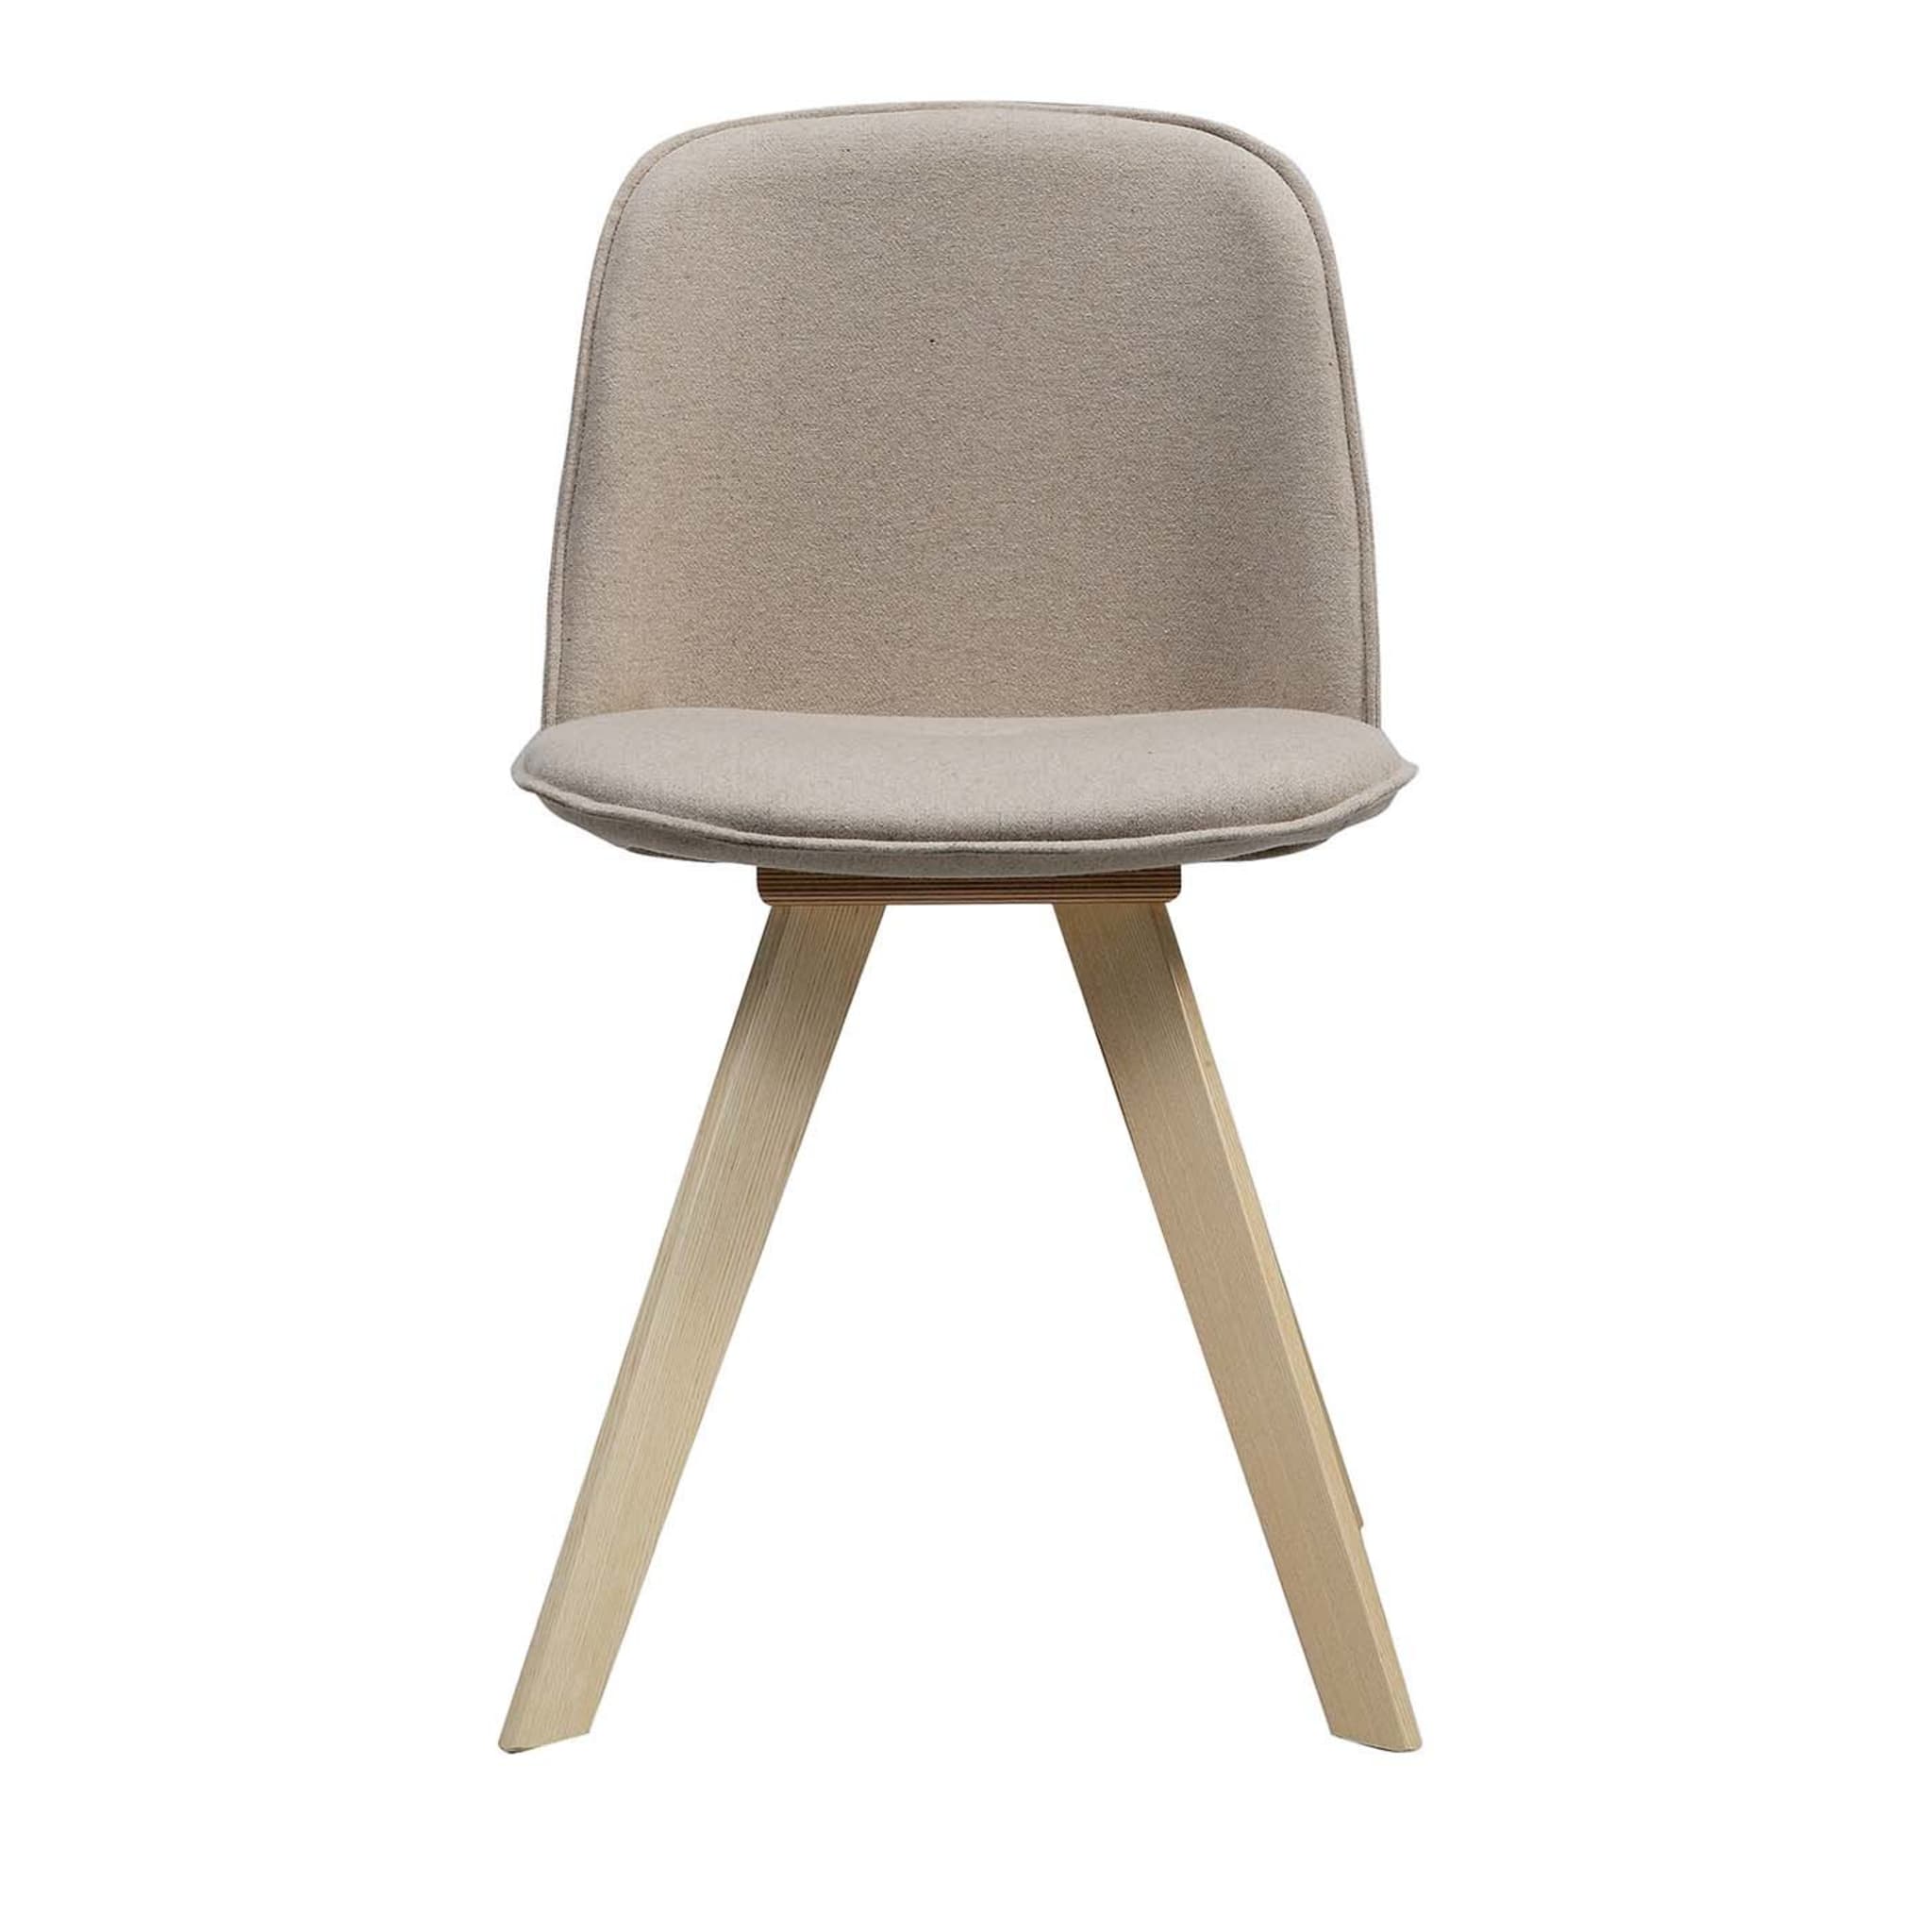 Set Of 2 Molly K Chair Beige - Main view